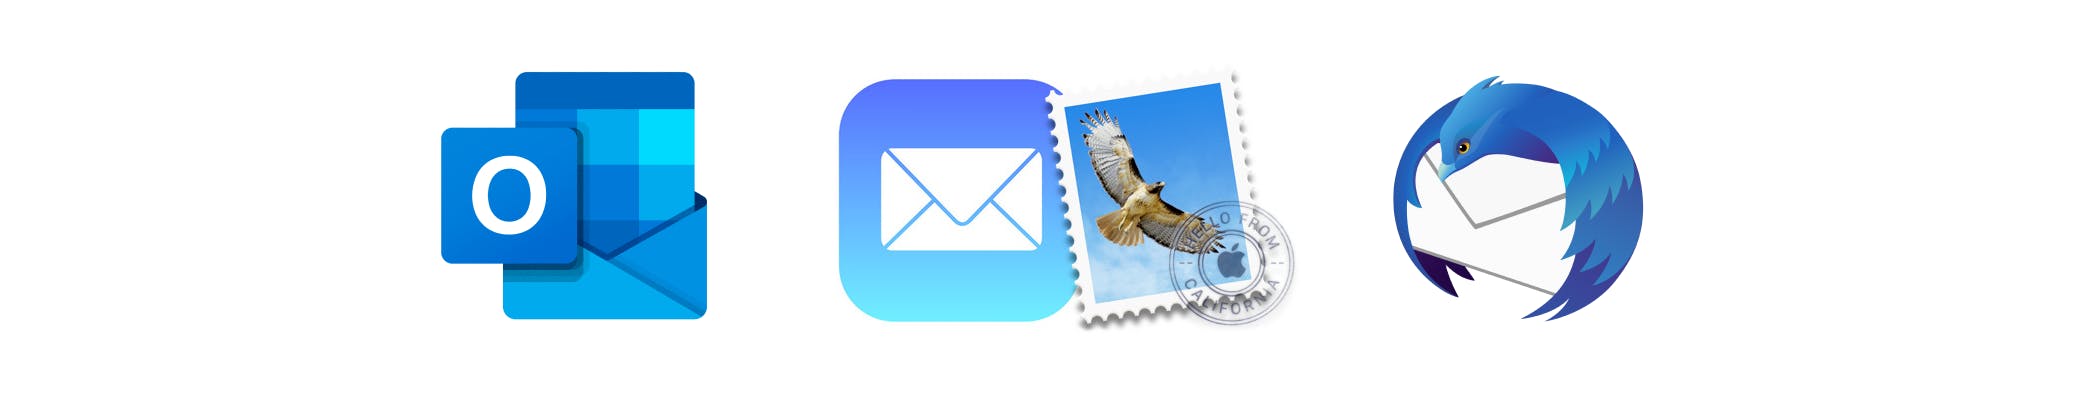 Logo's of IMAP options. First logo: Outlook, second logo the new logo for Apple Mail and the old logo for Apple Mail, and the third logo: Thunderbird.